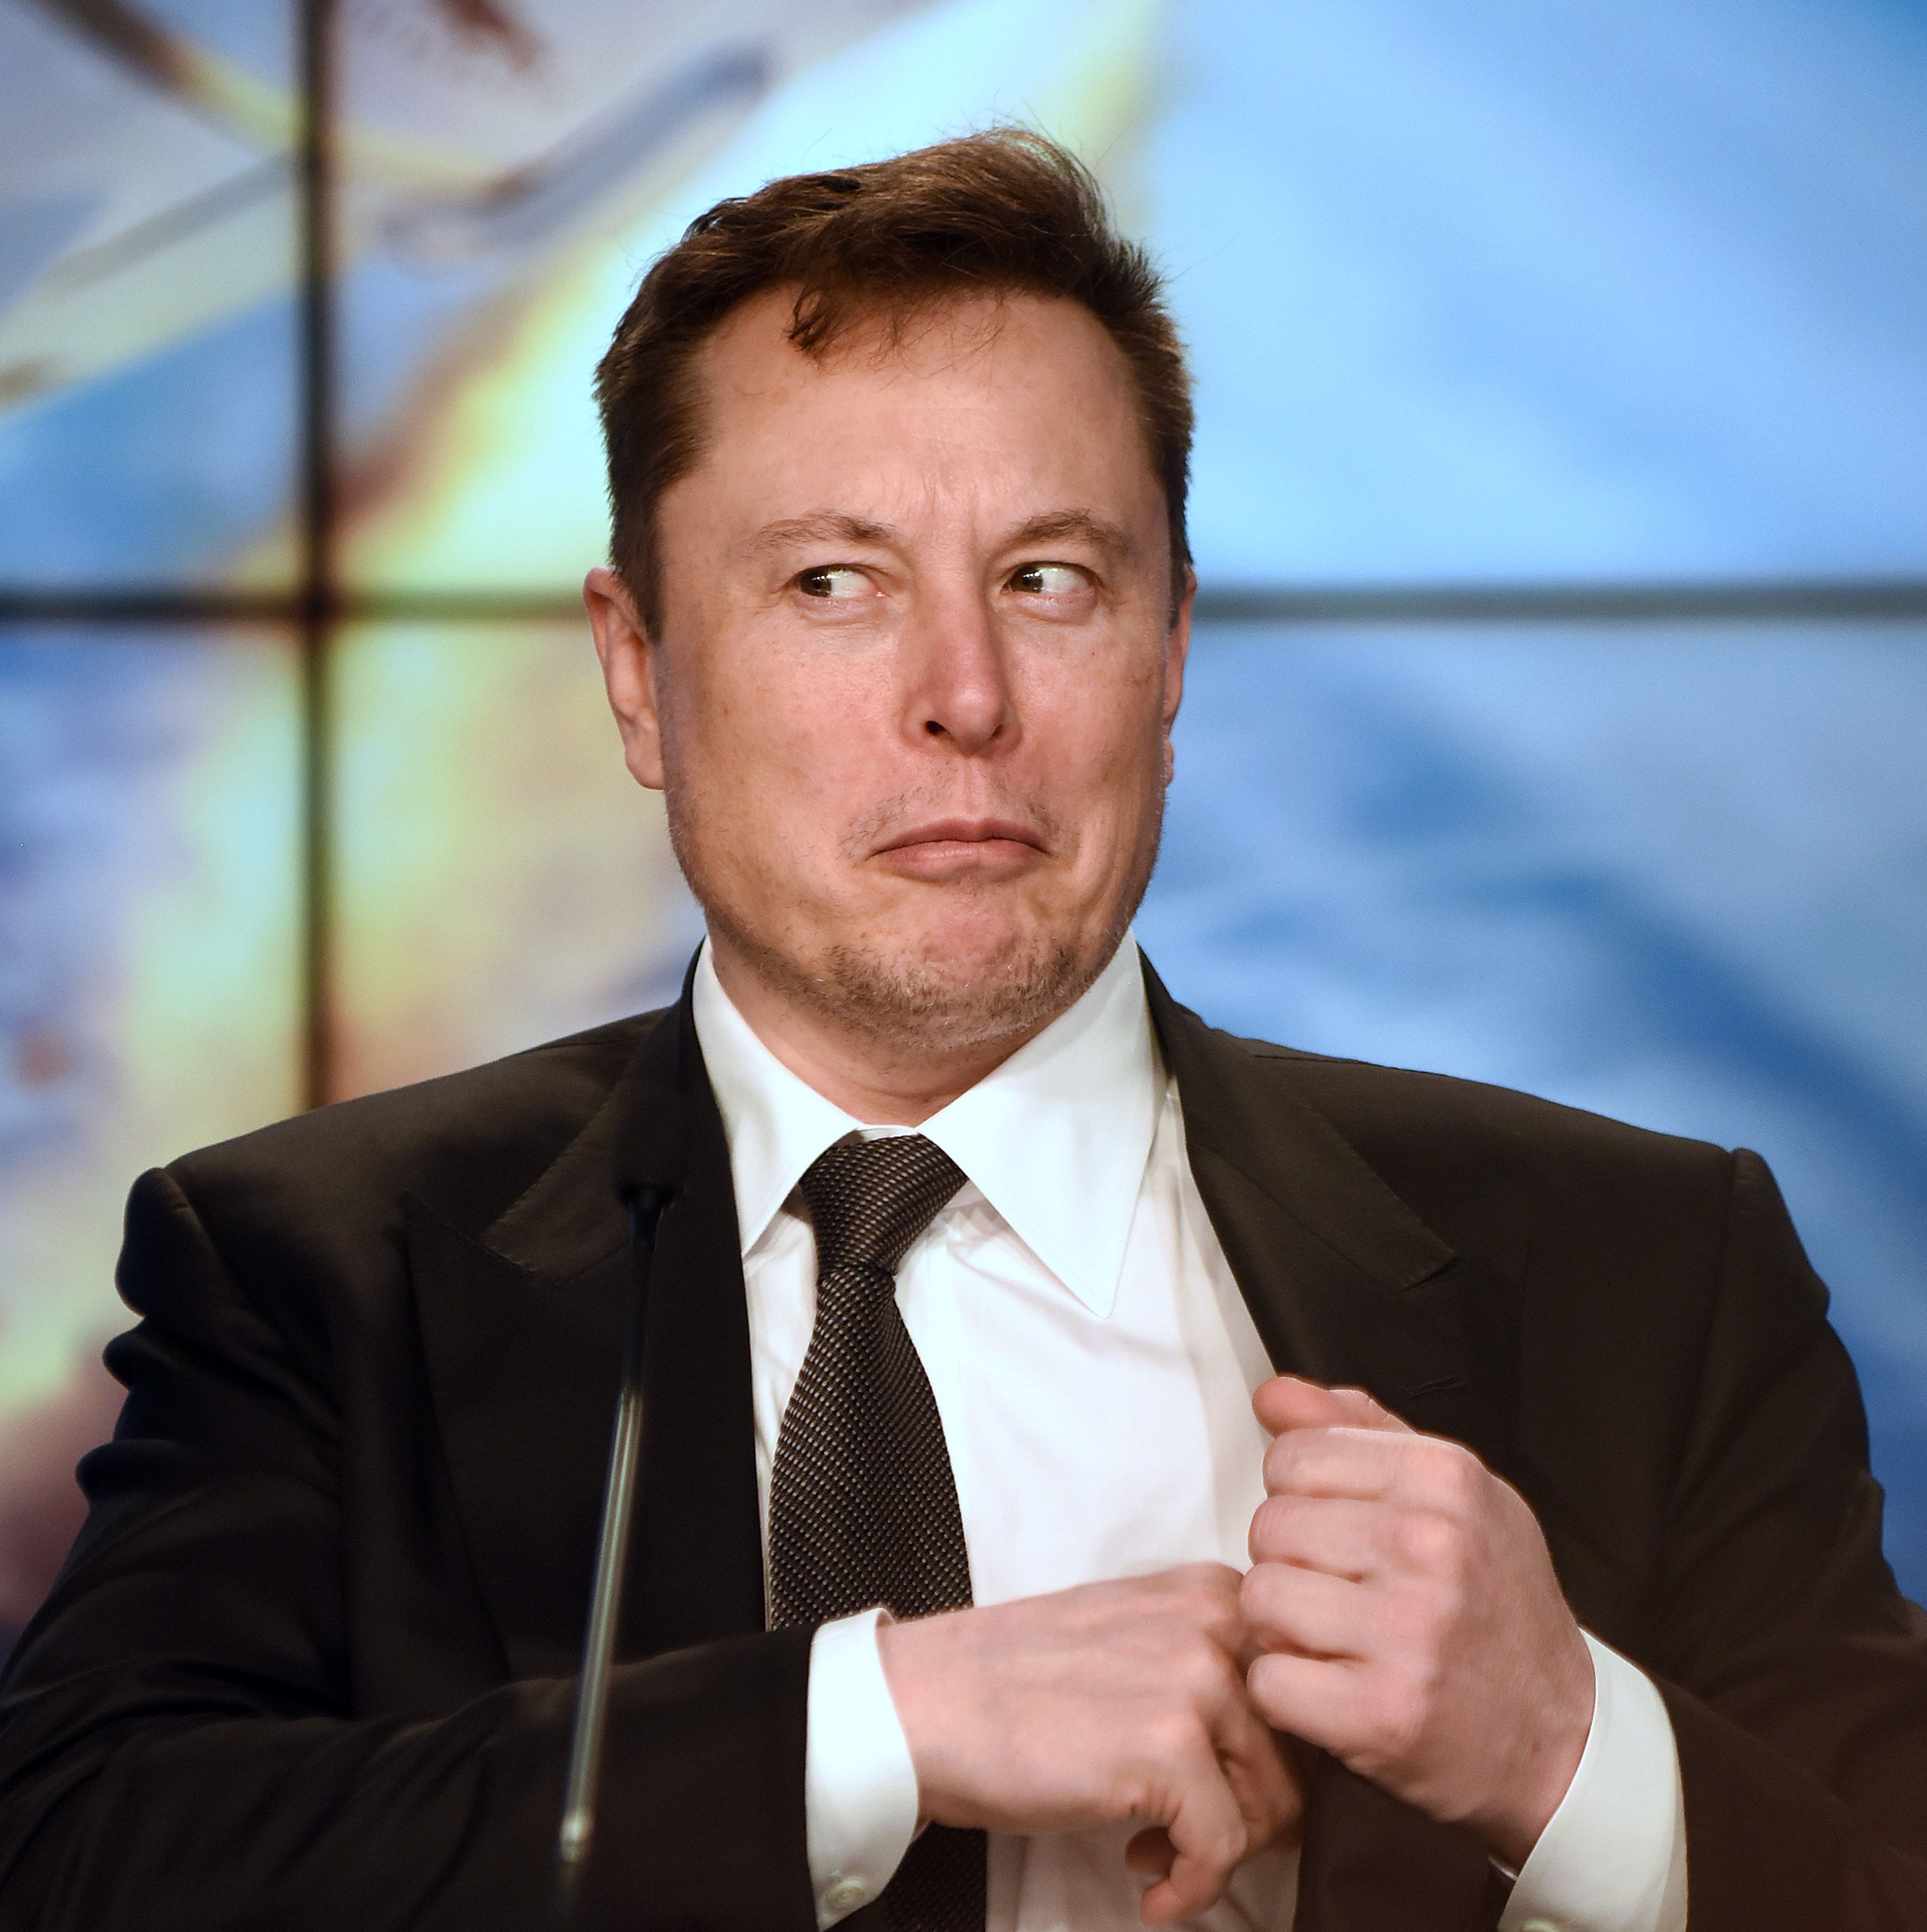 Elon Musk Has Big Plans For Turning This Greenhouse Gas Into Rocket Fuel